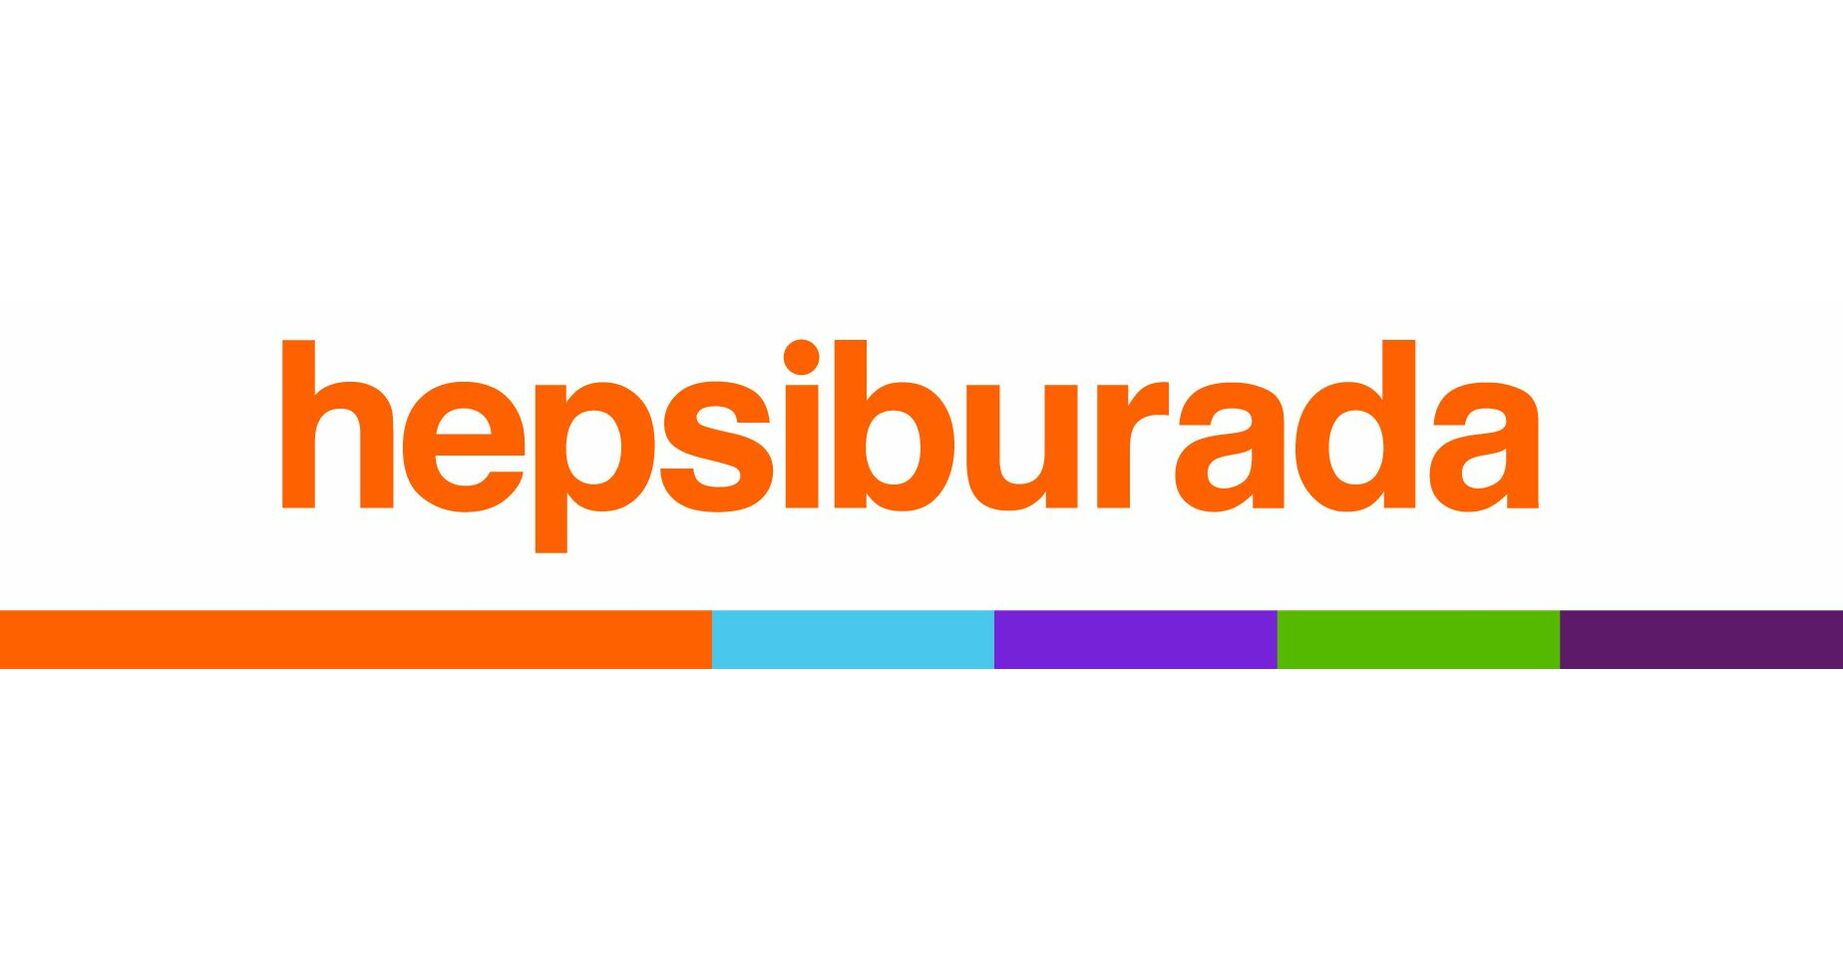 Through “Trade and Technology Empowerment for the Earthquake Region” program, Hepsiburada Contributed to a TRY 1.9 Billion Trade Volume in the Region